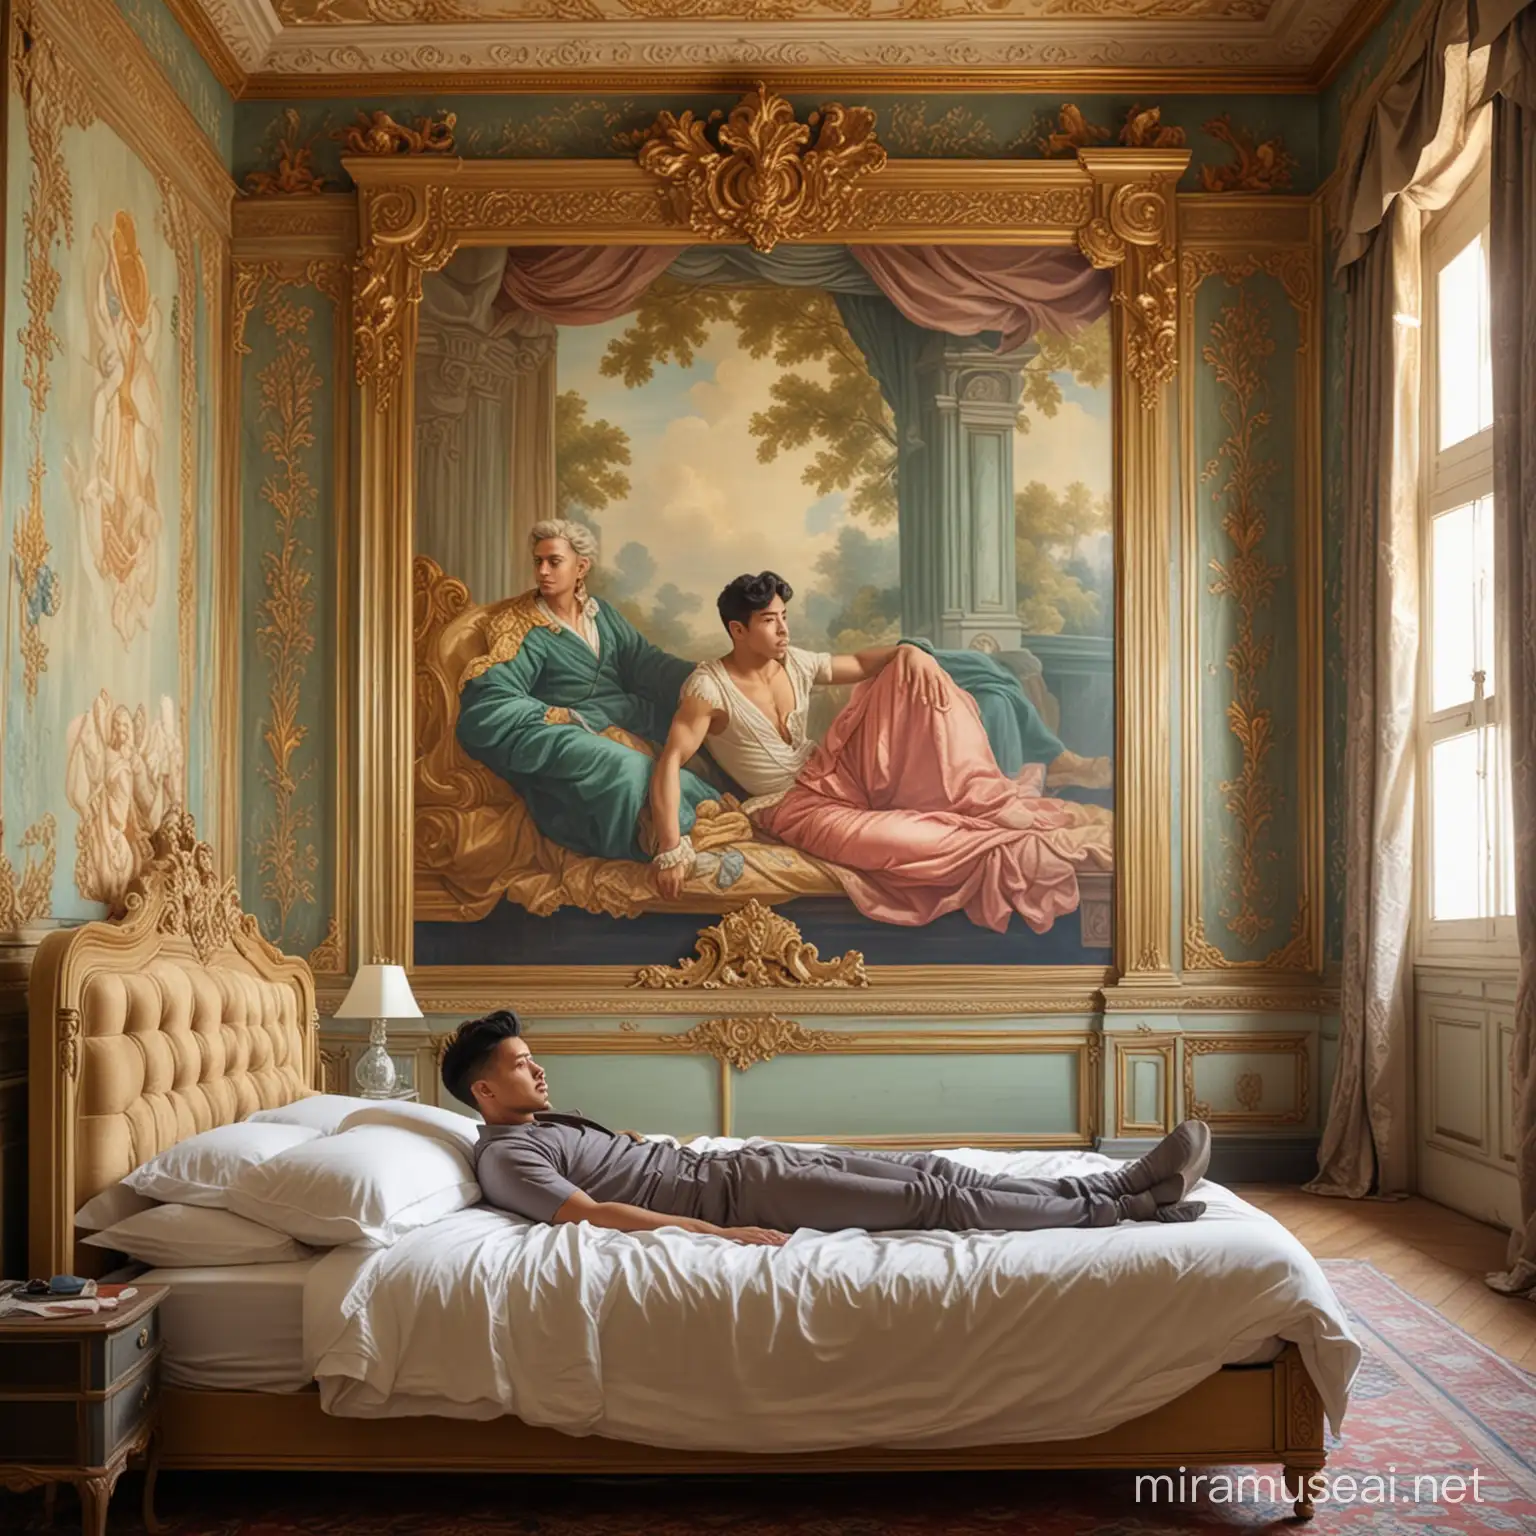 Handsome Indonesian Man Relaxing in Opulent Rococo Bedroom with Renaissance Mural